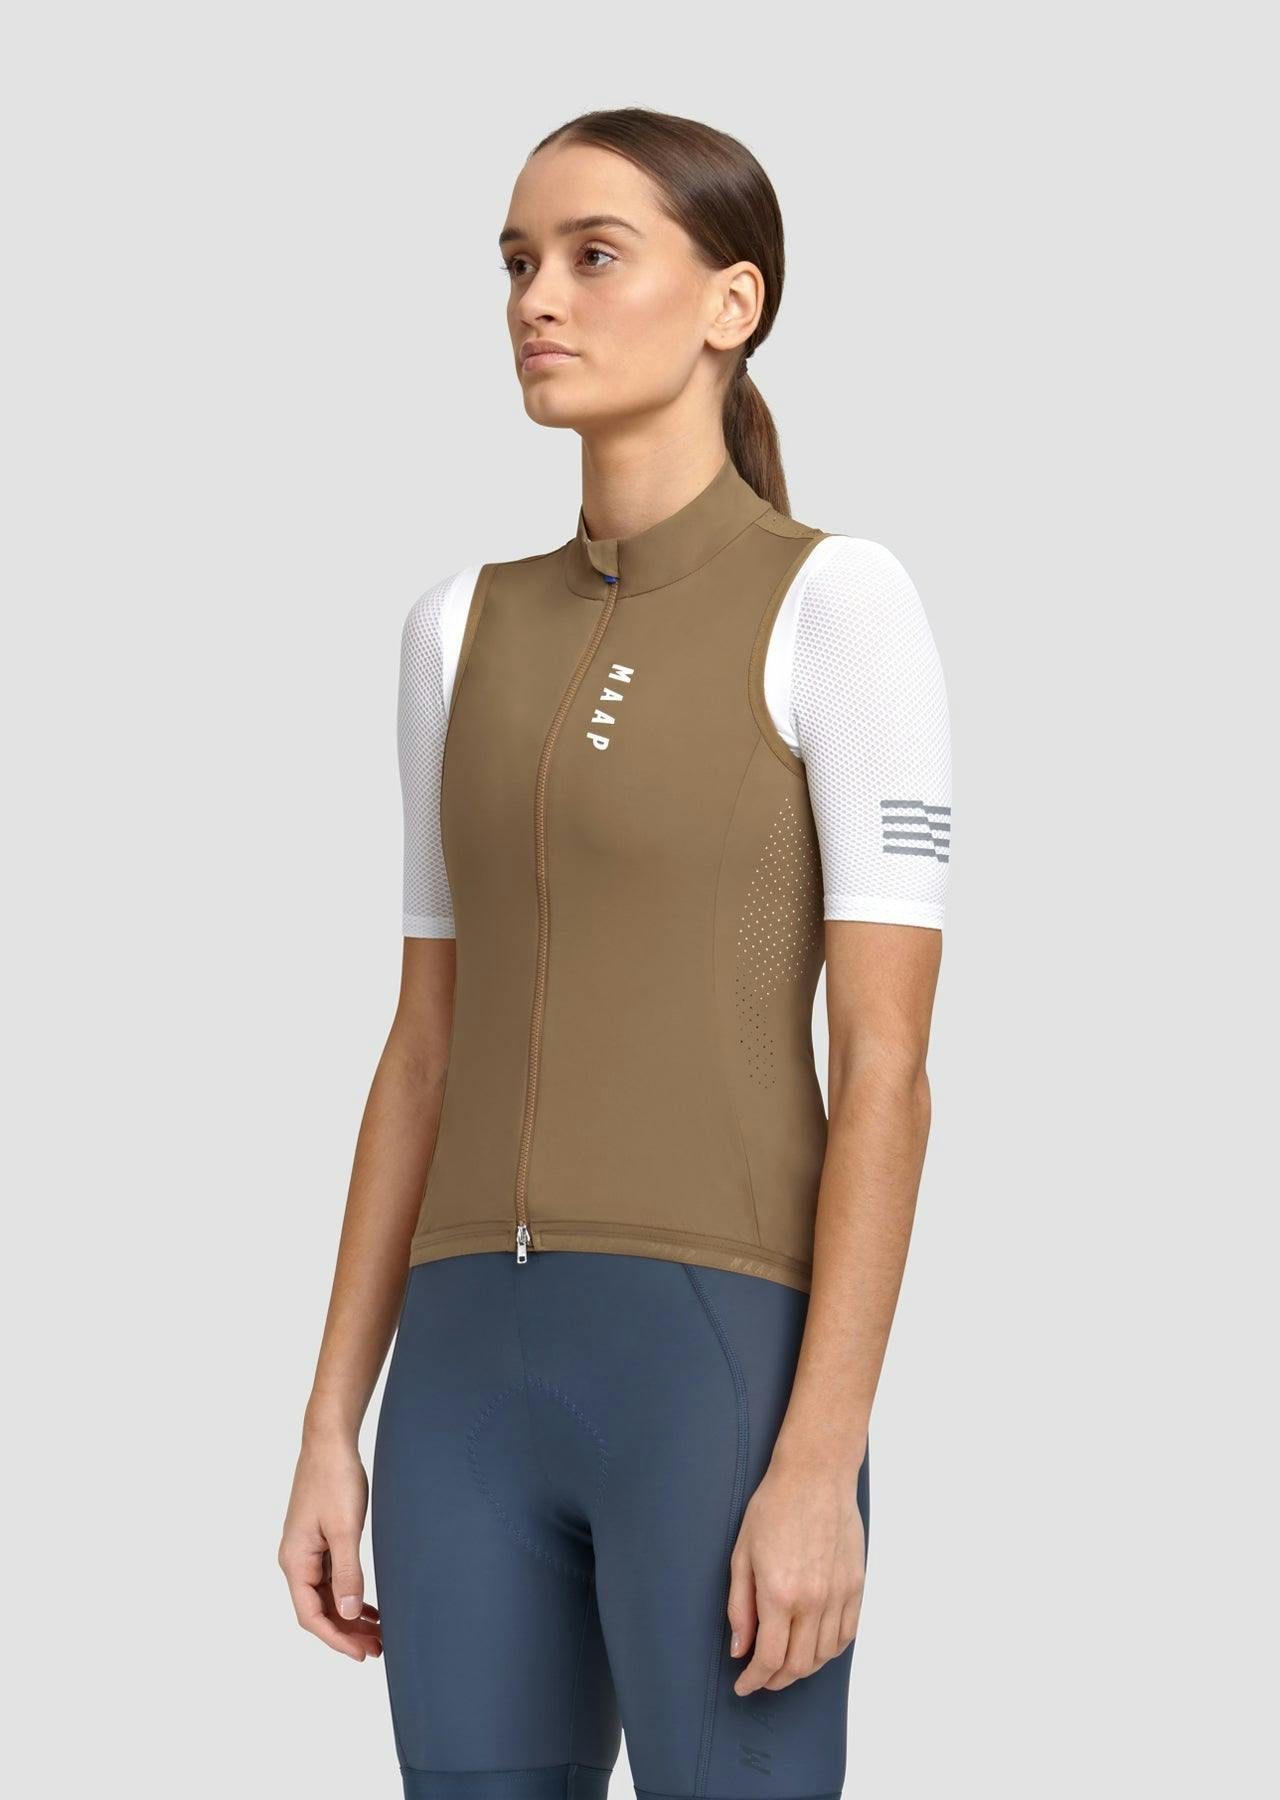 Women’s Cycling Vests | Cycling Wind Vest | MAAP